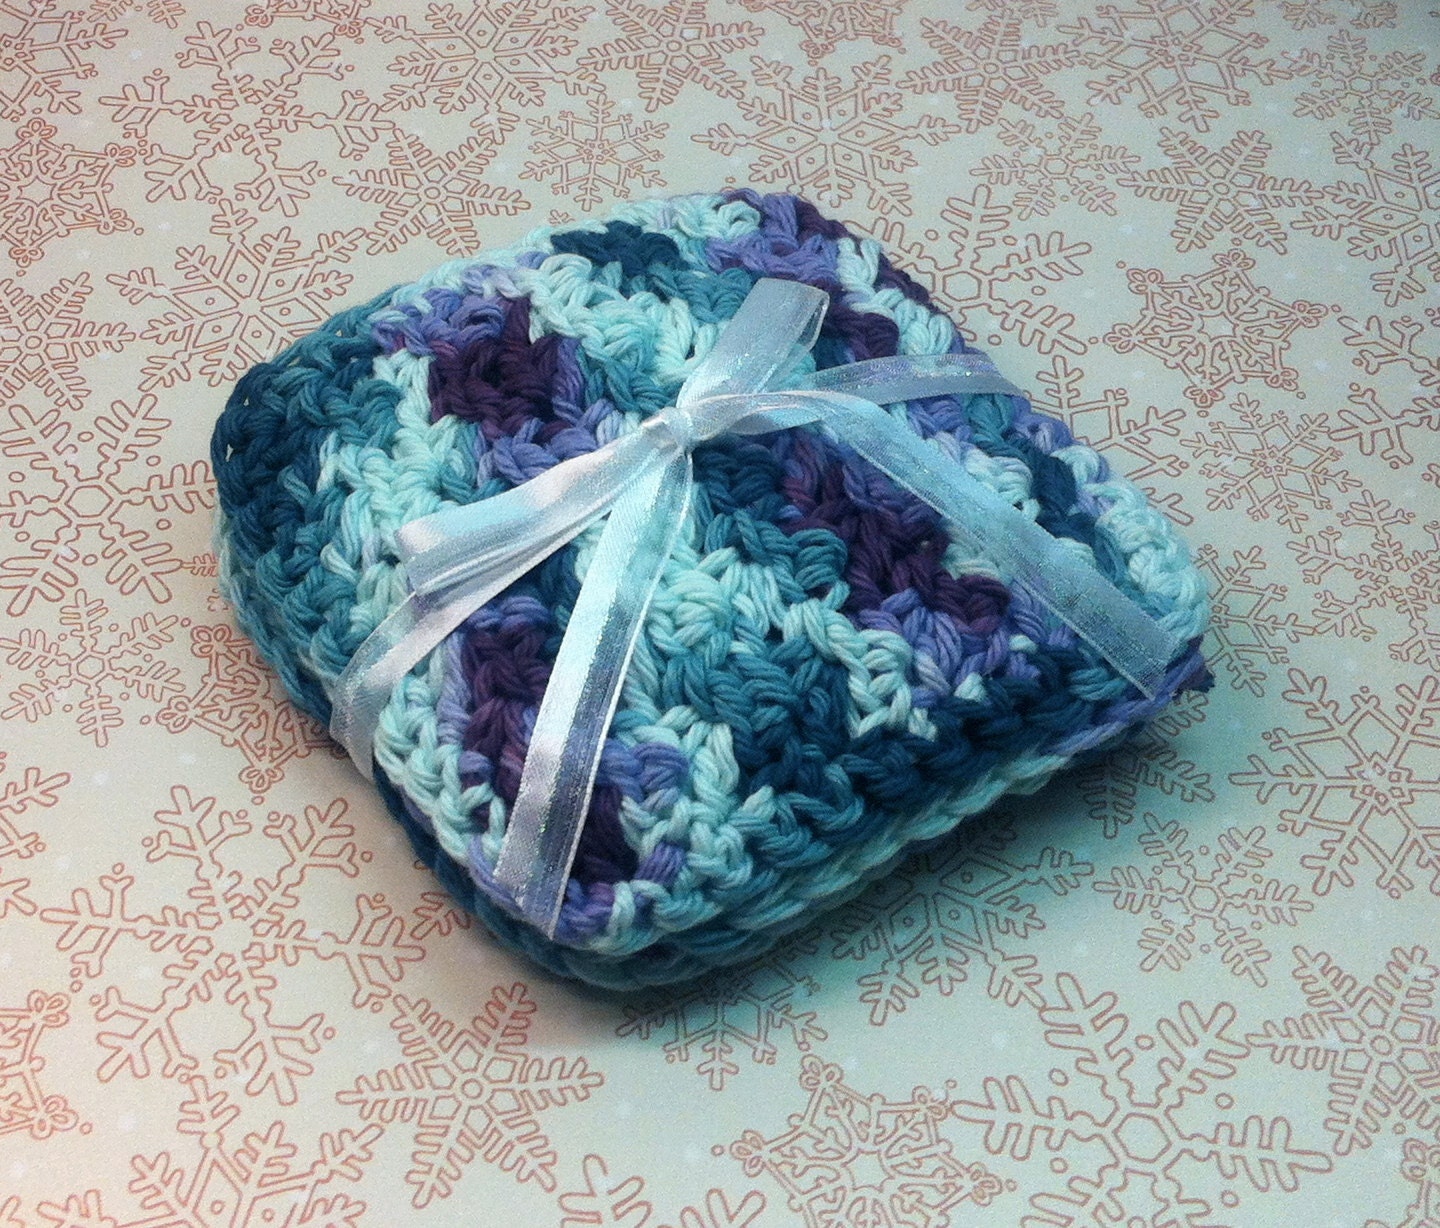 Set of 4 Crochet Coasters, Square Coaster Set, Purple and Teal Variegated, Ready to Ship - KathysYarnCreations